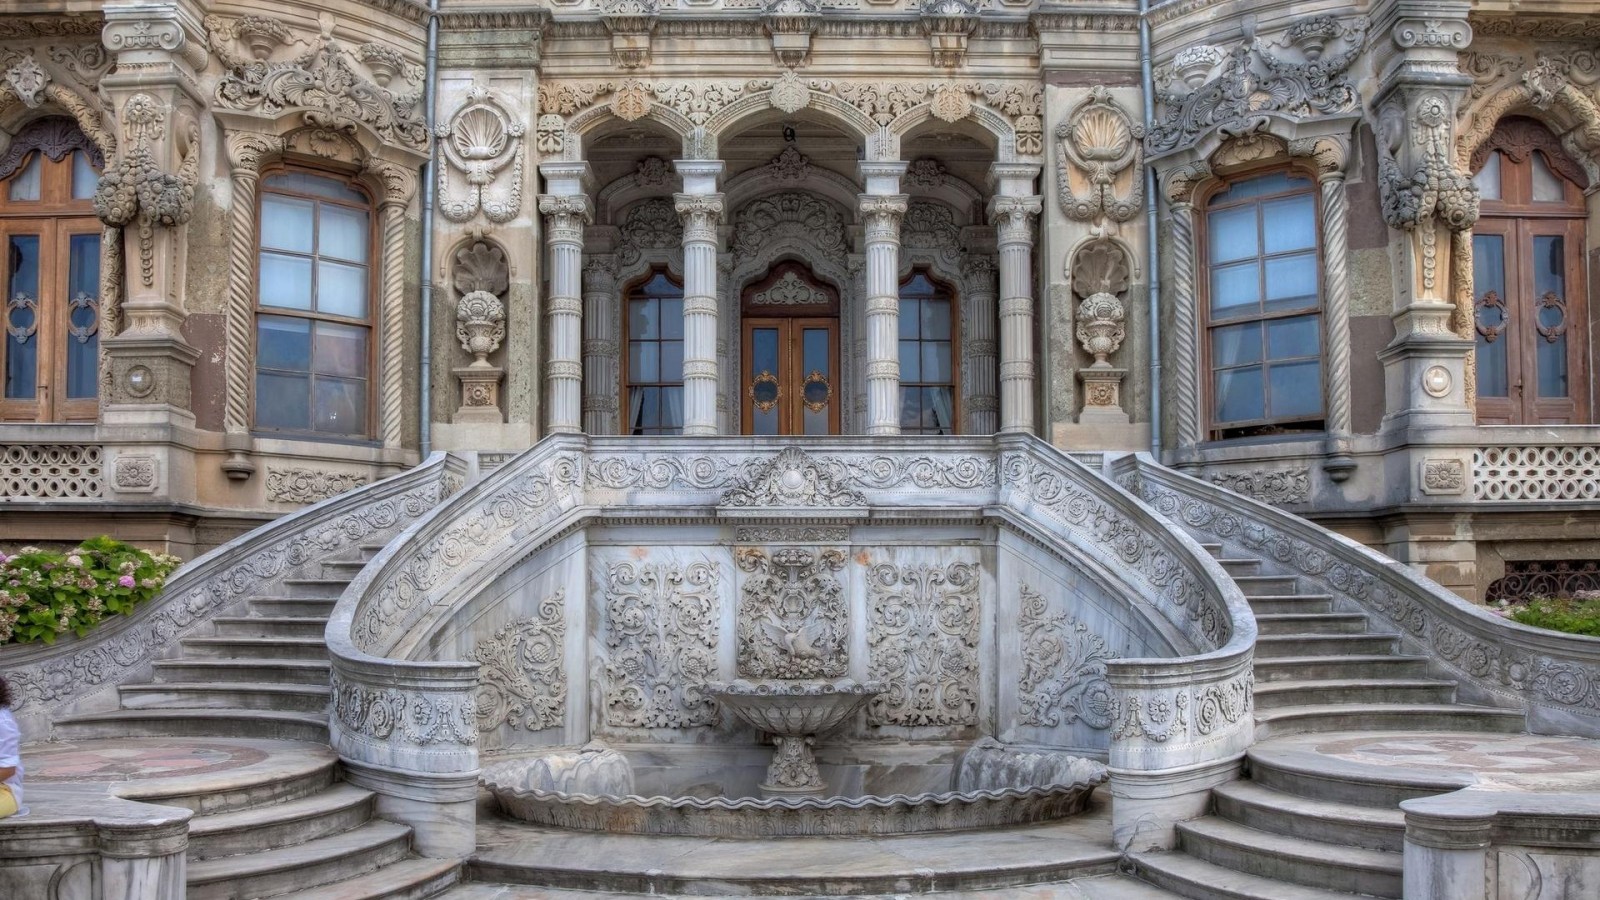 palace wallpaper hd,classical architecture,architecture,building,facade,stone carving